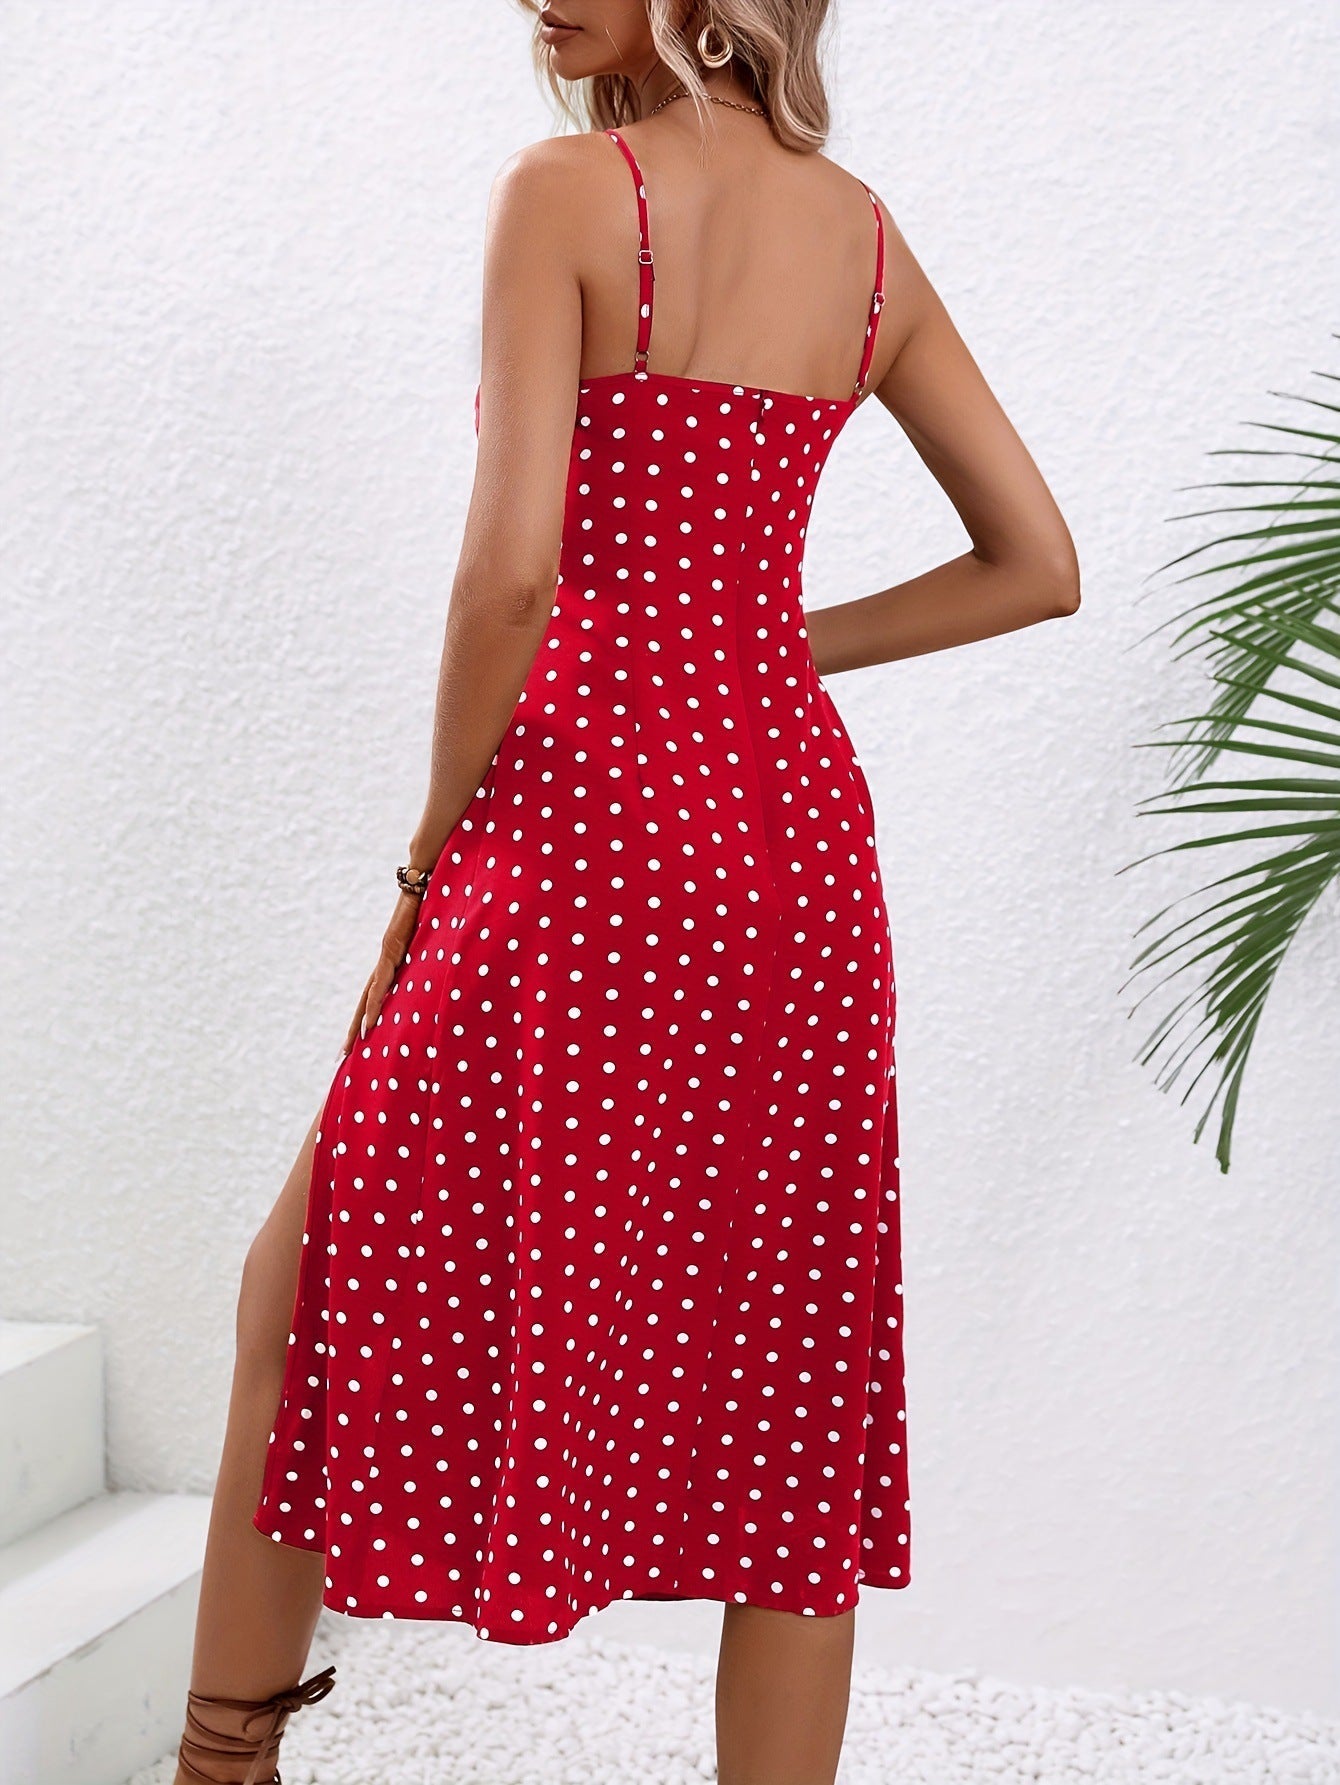 Polka Dot Print Maxi Dress with Sexy Slit and Suspender Straps